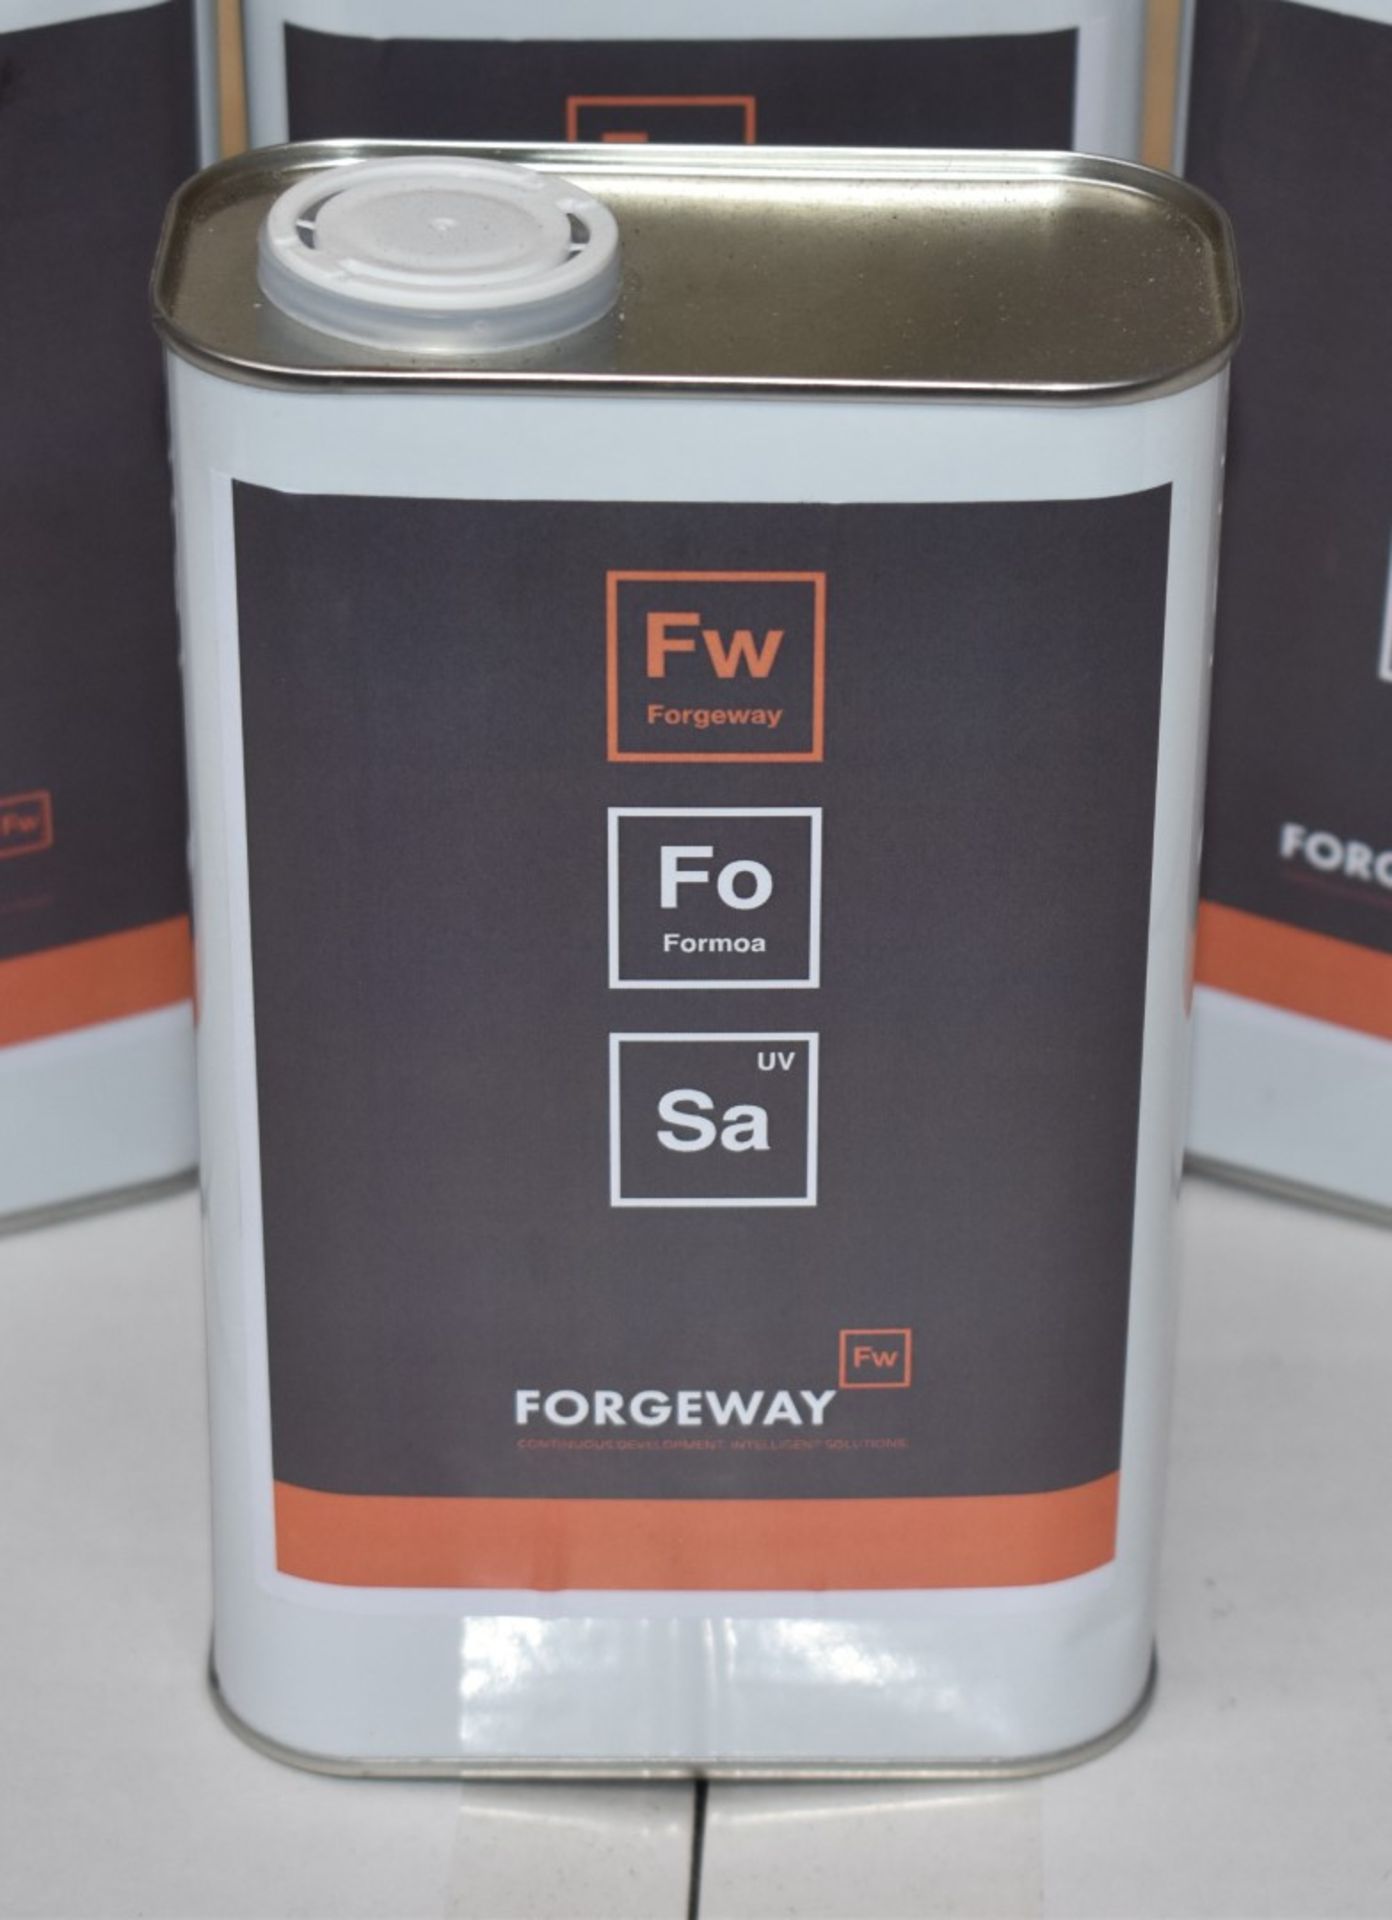 60 x Forgeway Formoa Surface Activator 1 Litre Containers - Adhesion Promotor, Cleaner, Degreaser - Image 5 of 7